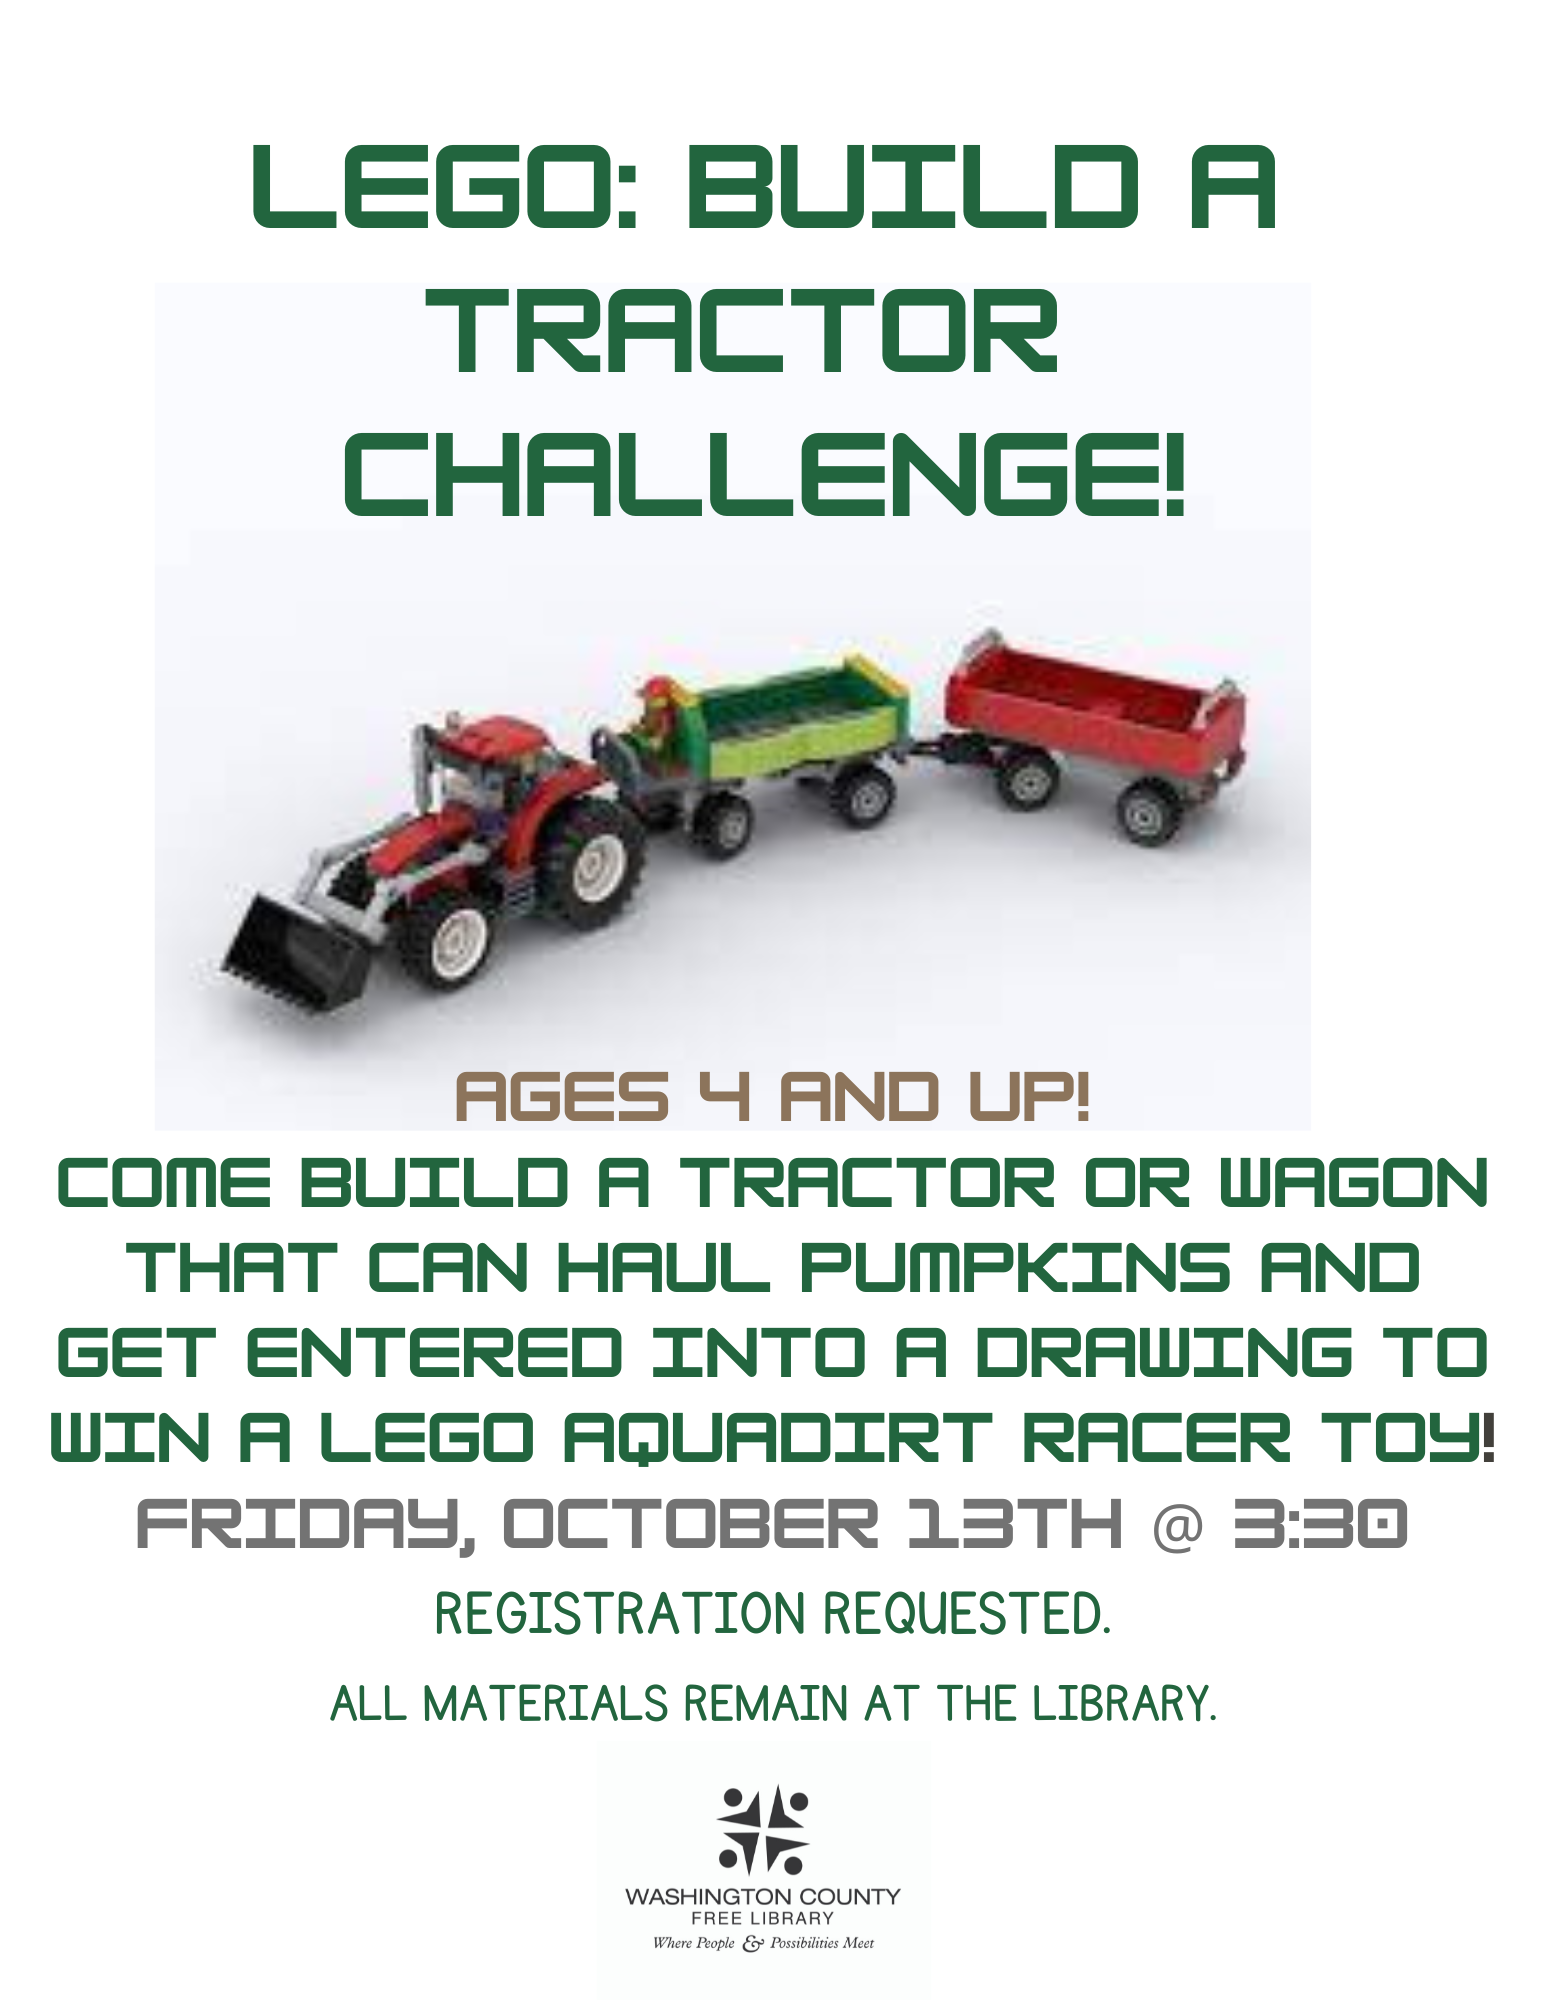 Lego: Build a Tractor